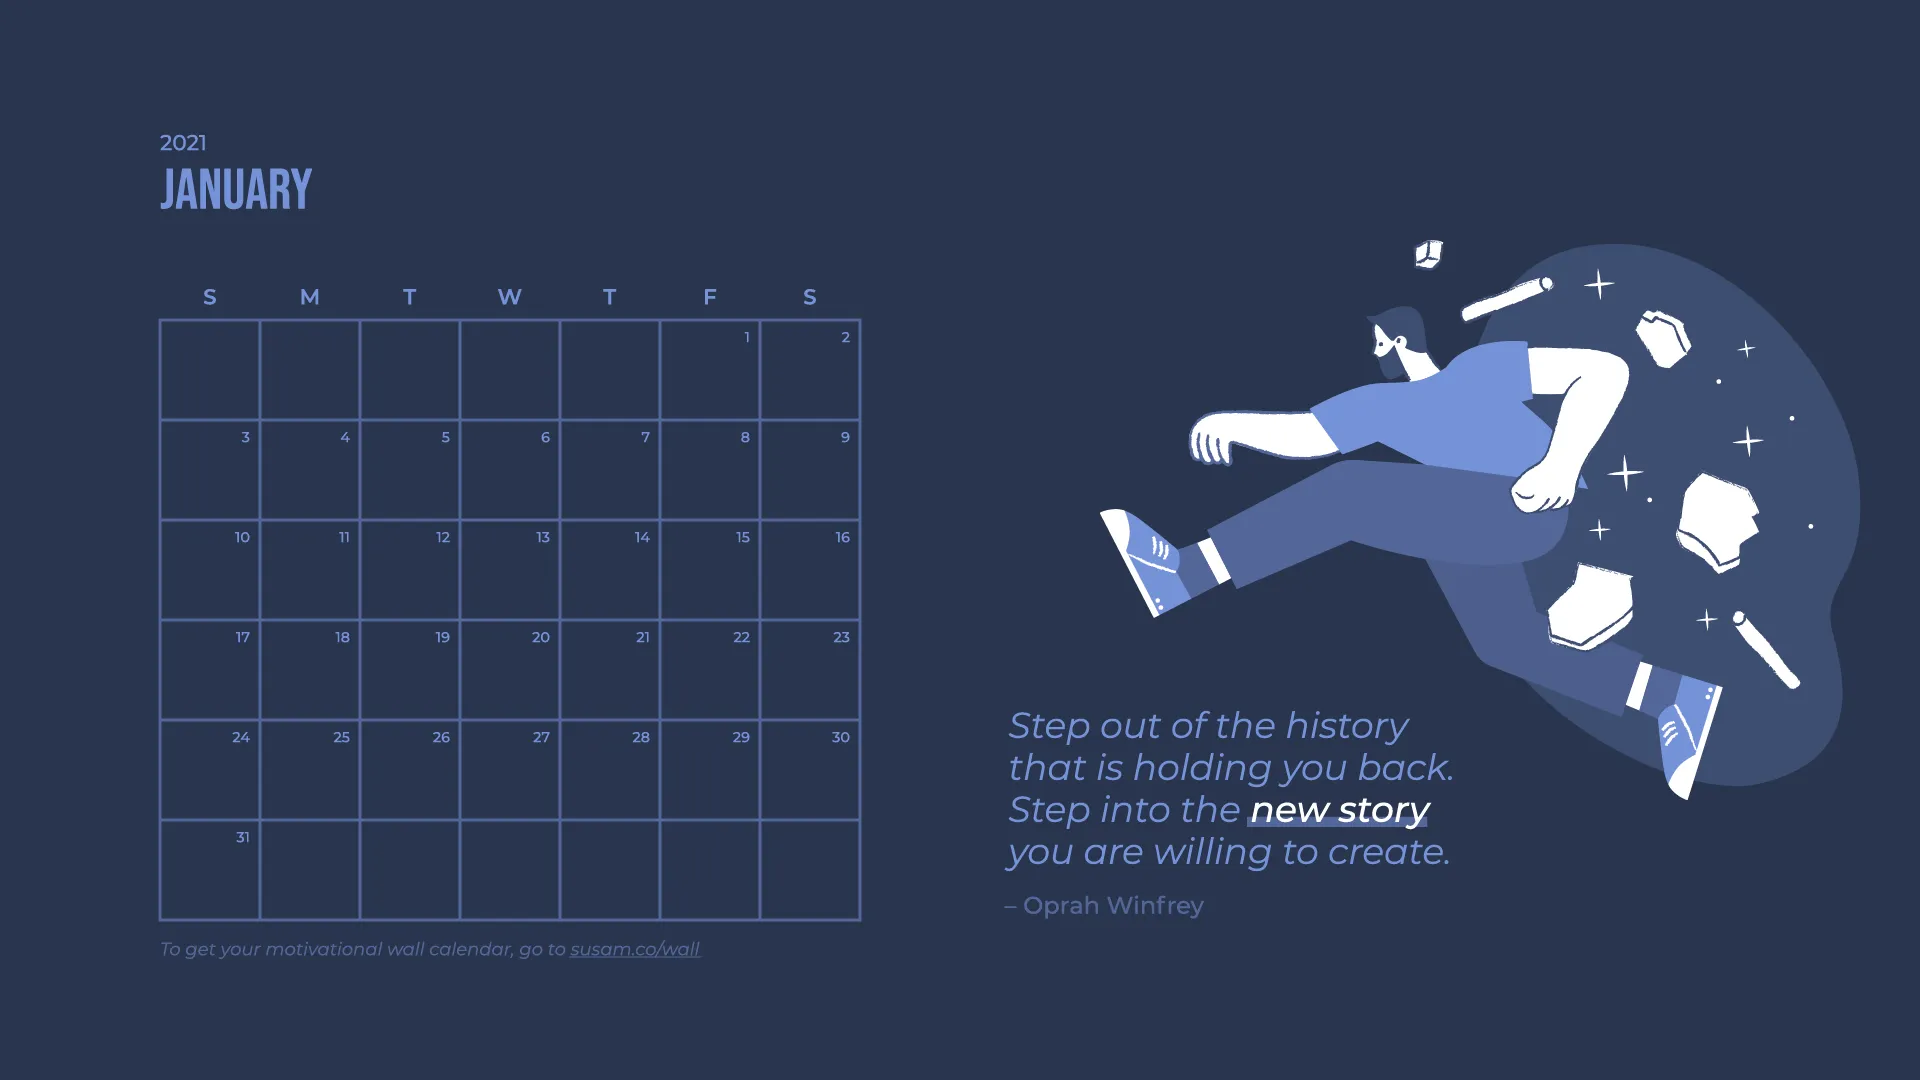 January 2019 calendar with an illustration of a man running.